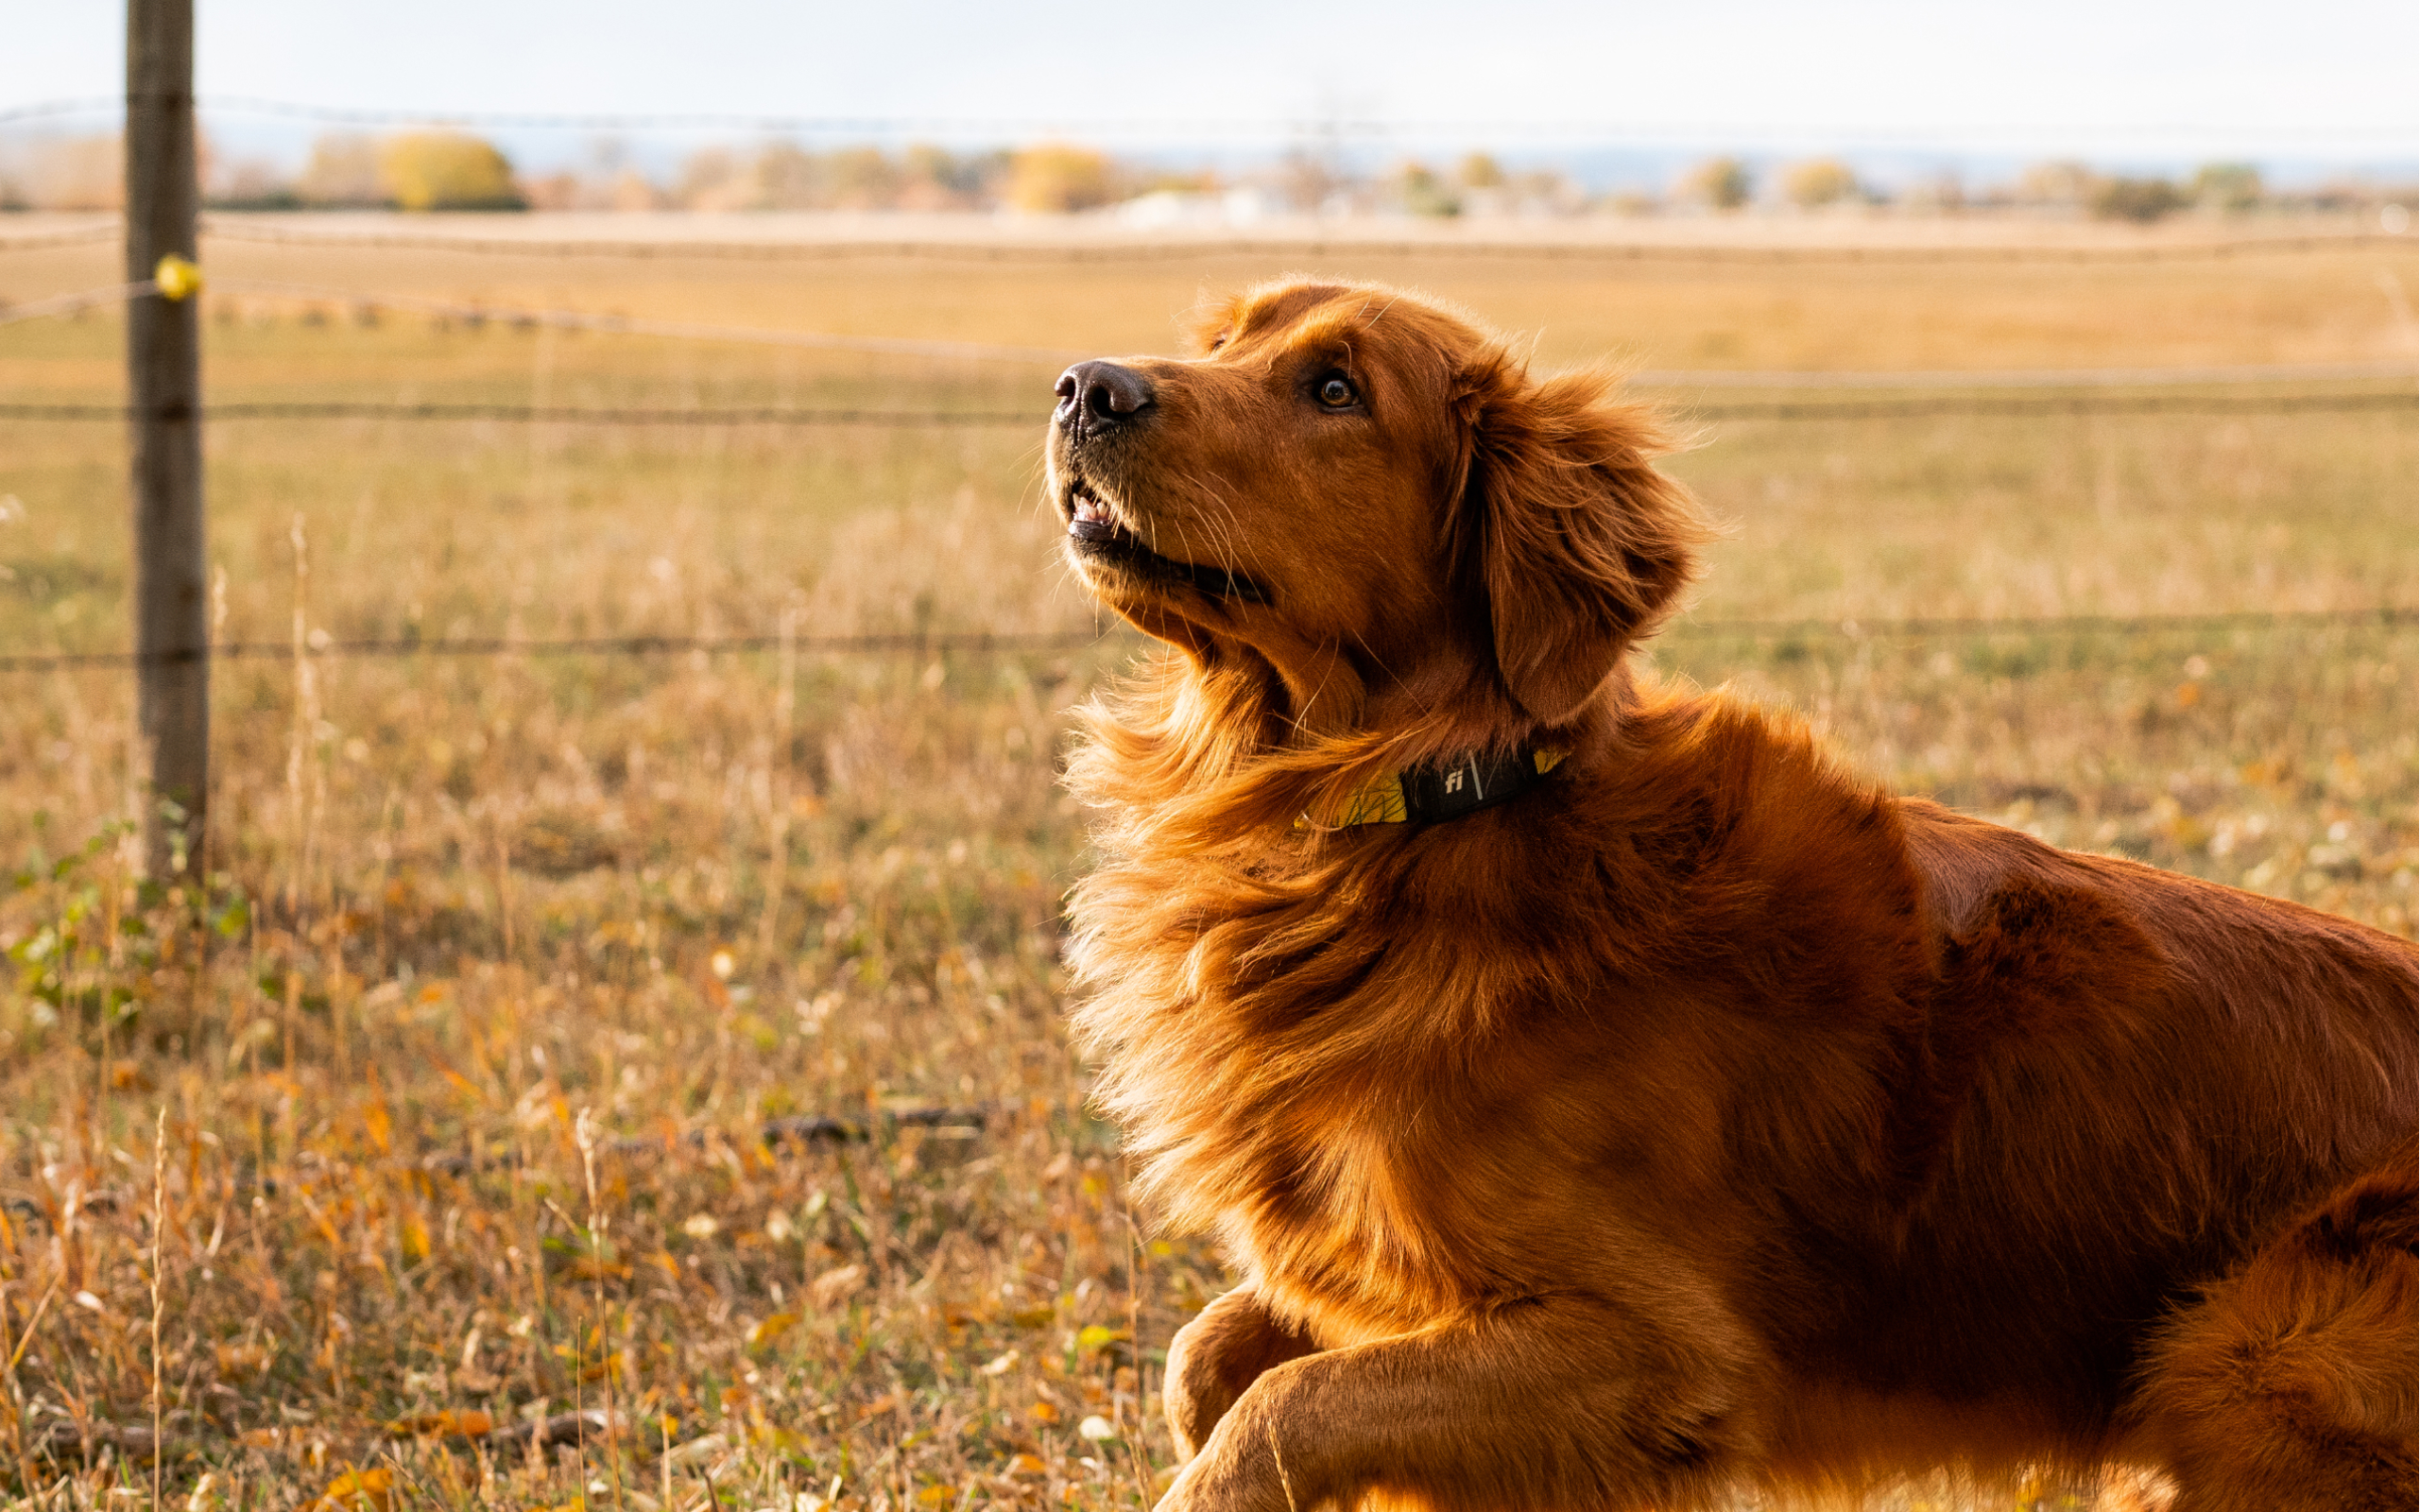 A happy and healthy Golden Retriever